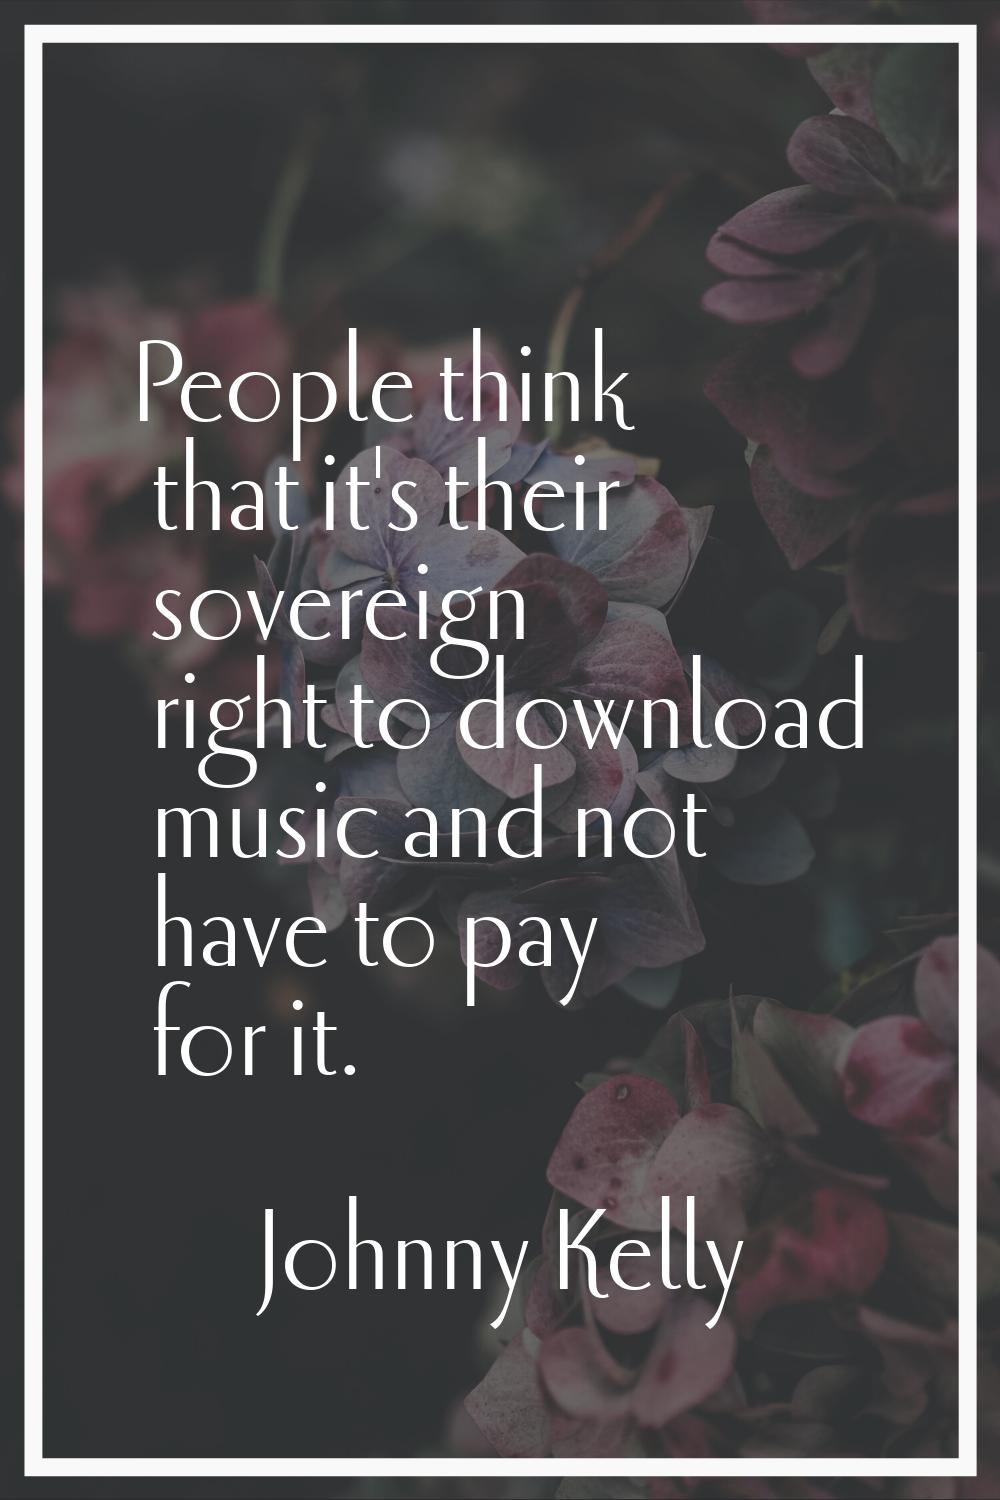 People think that it's their sovereign right to download music and not have to pay for it.